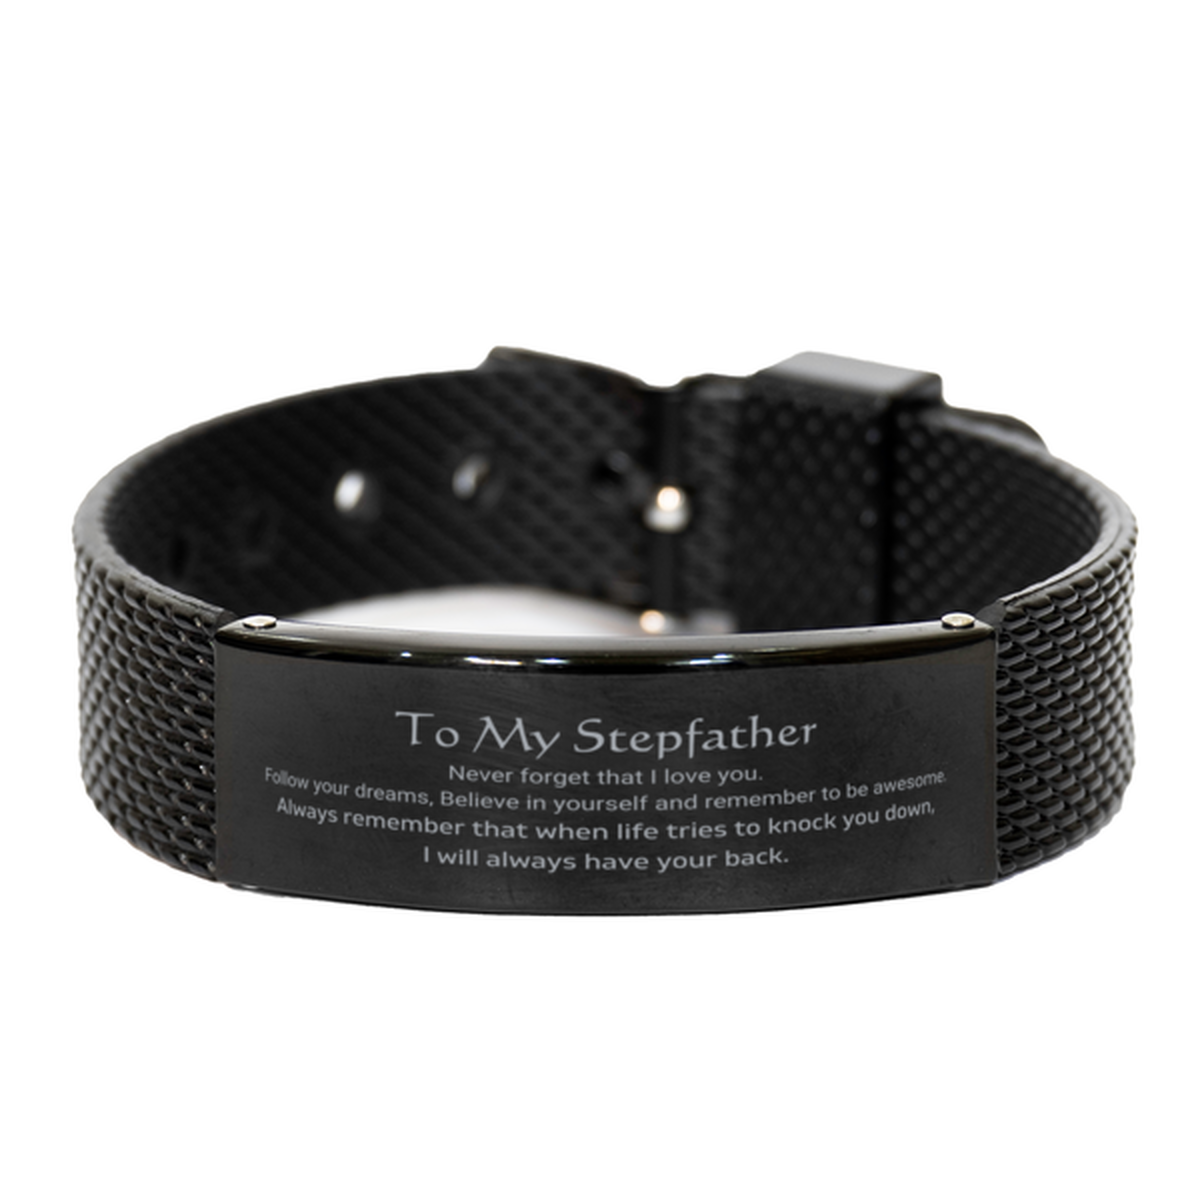 Inspirational Gifts for Stepfather, Follow your dreams, Believe in yourself, Stepfather Black Shark Mesh Bracelet, Birthday Christmas Unique Gifts For Stepfather